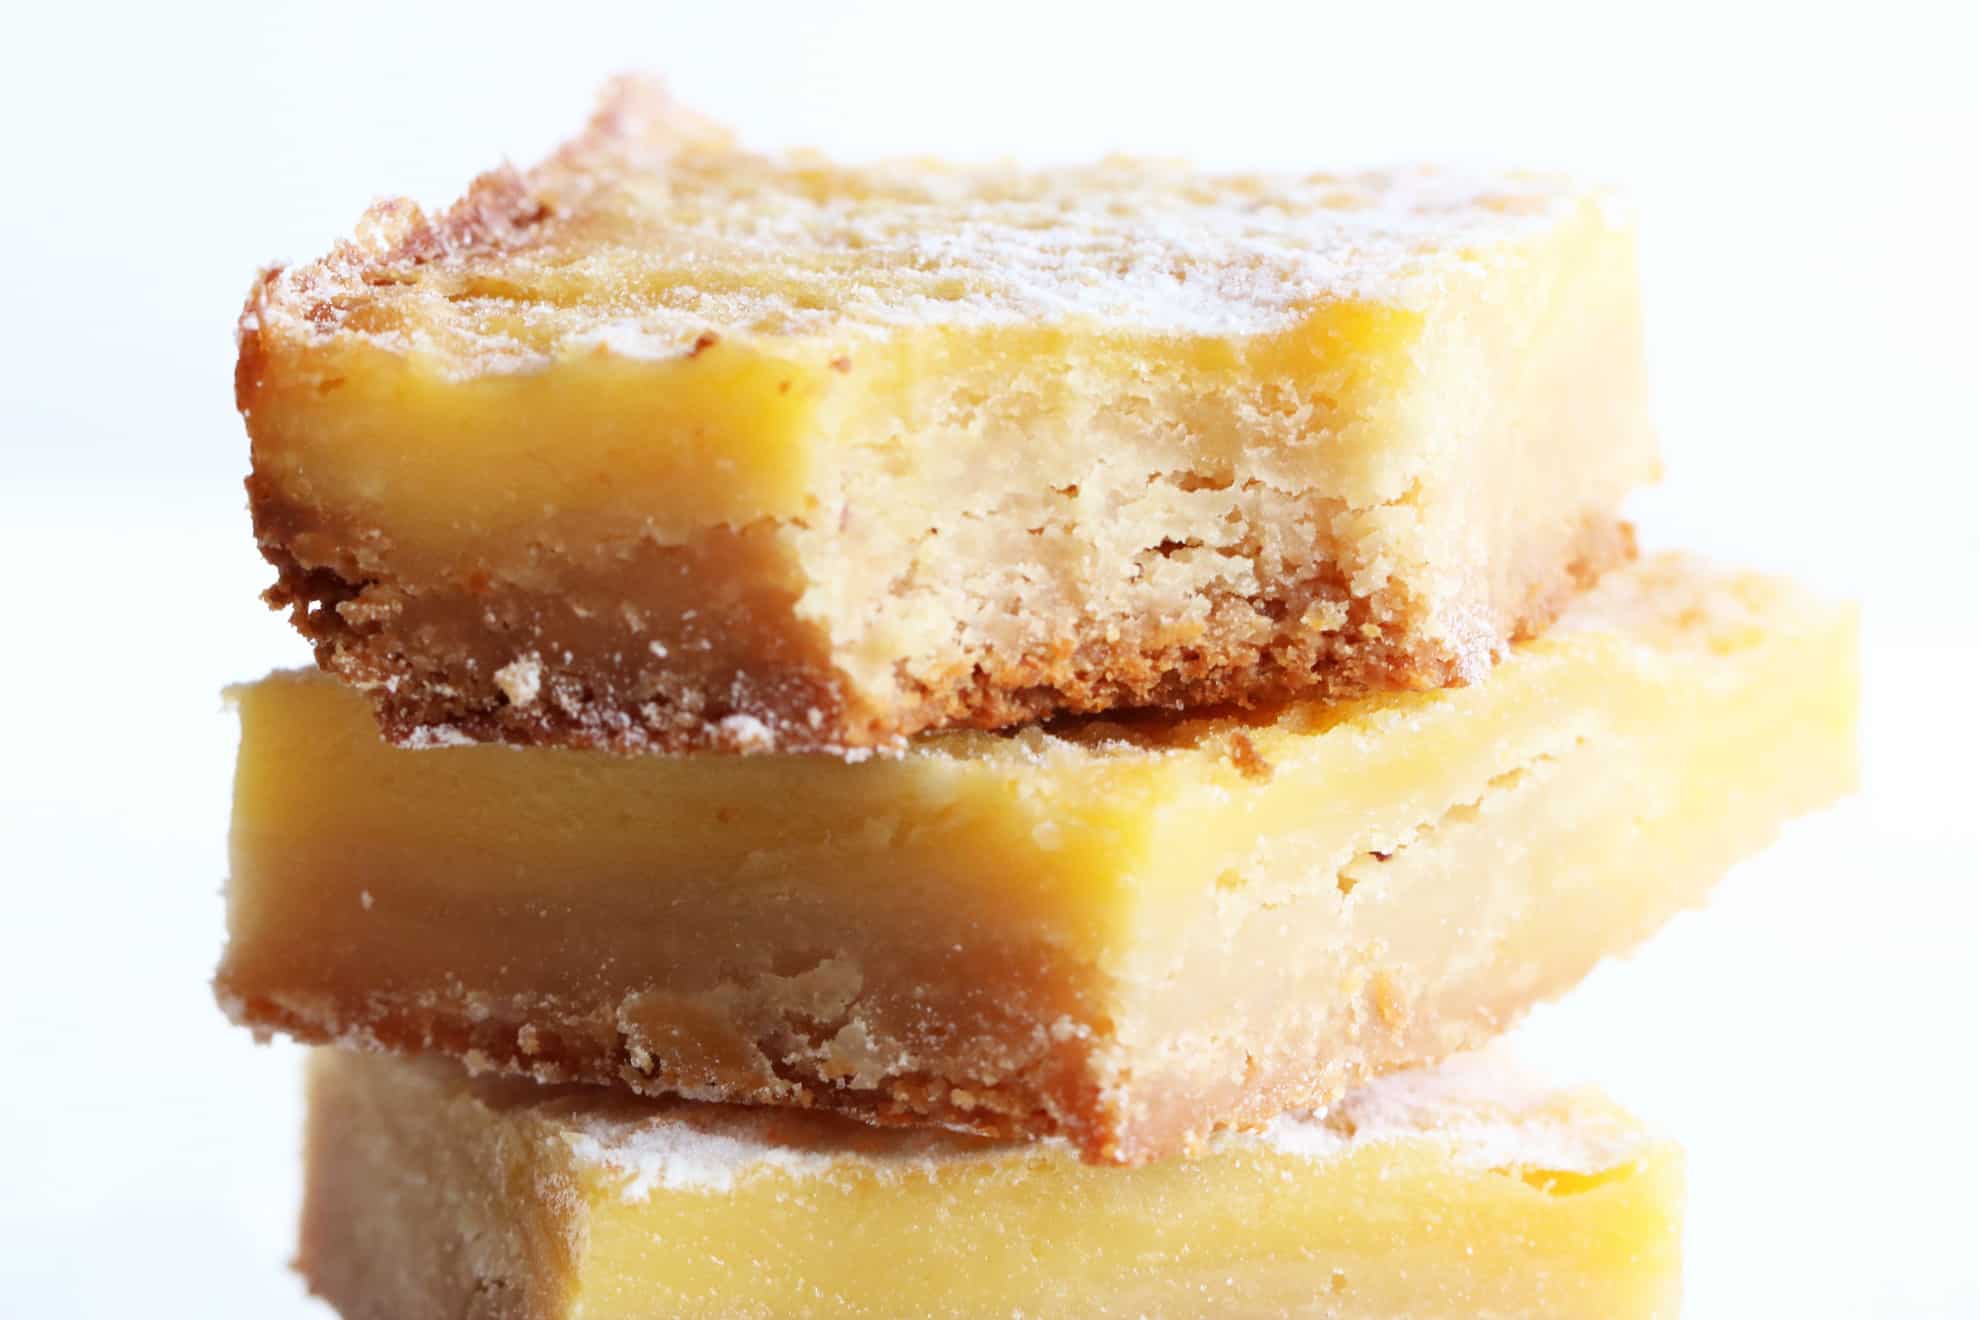 This is a close up image of a stack of lemon bars. The top bar has a bite taken out of it. 